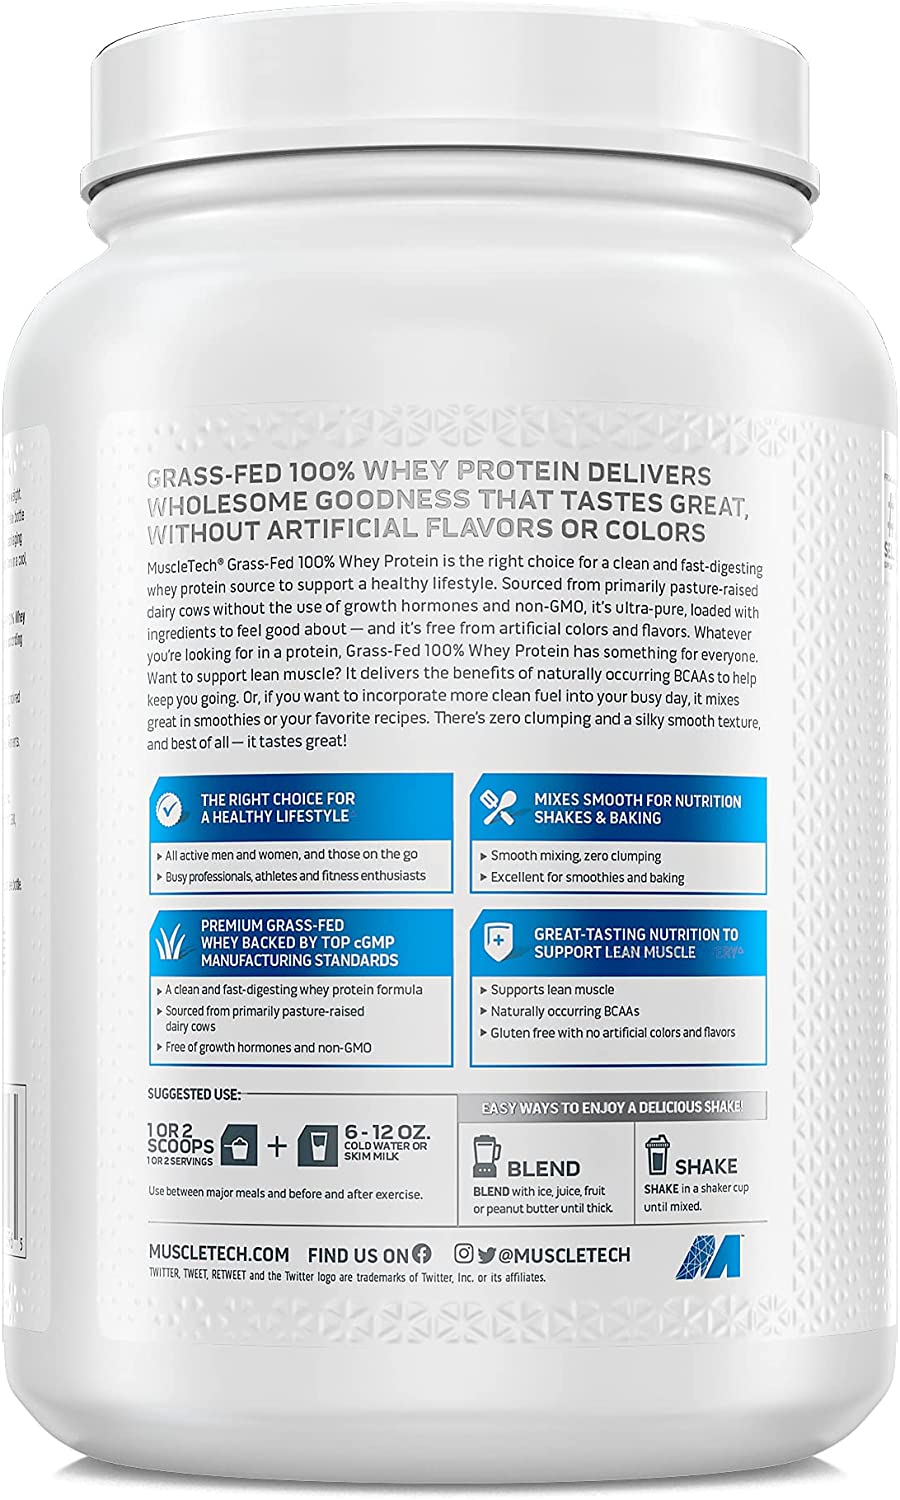 MuscleTech Grass-Fed 100% Whey Protein